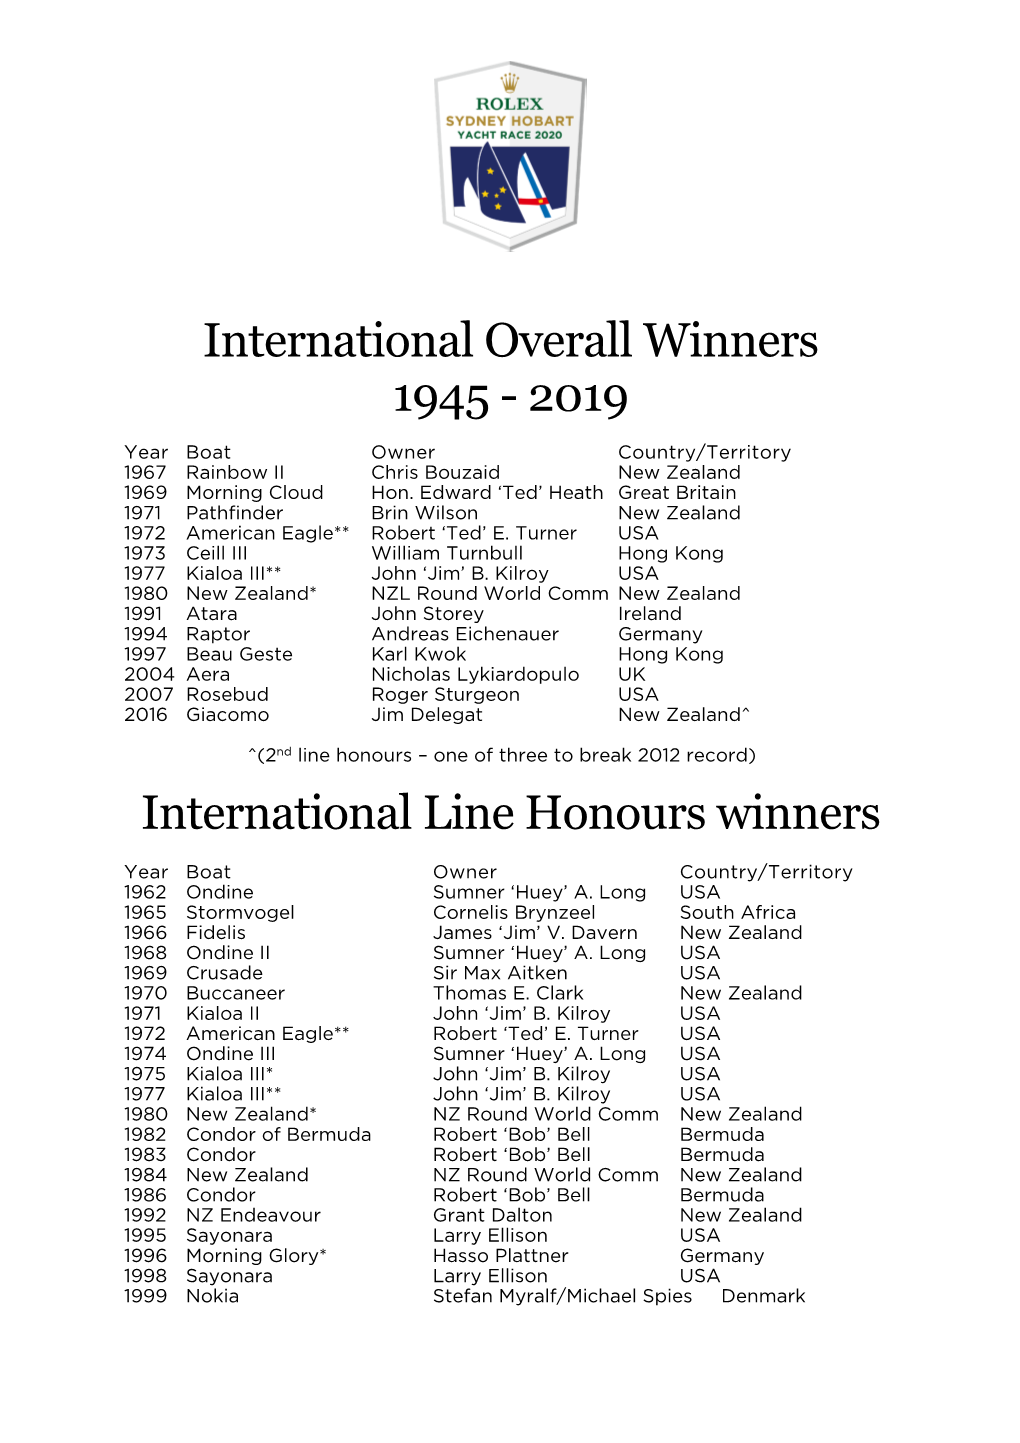 International Overall and Line Honours Winners 1945-2019